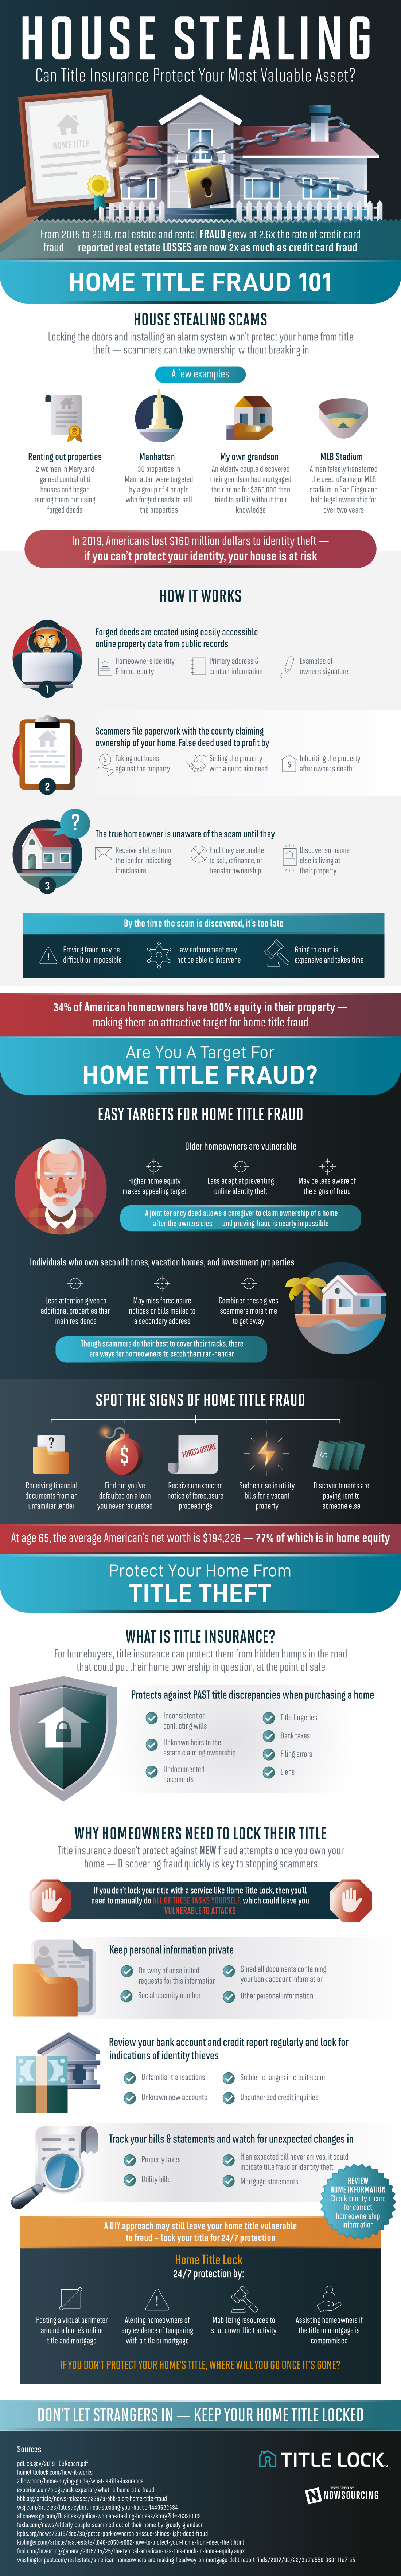 home title fraud